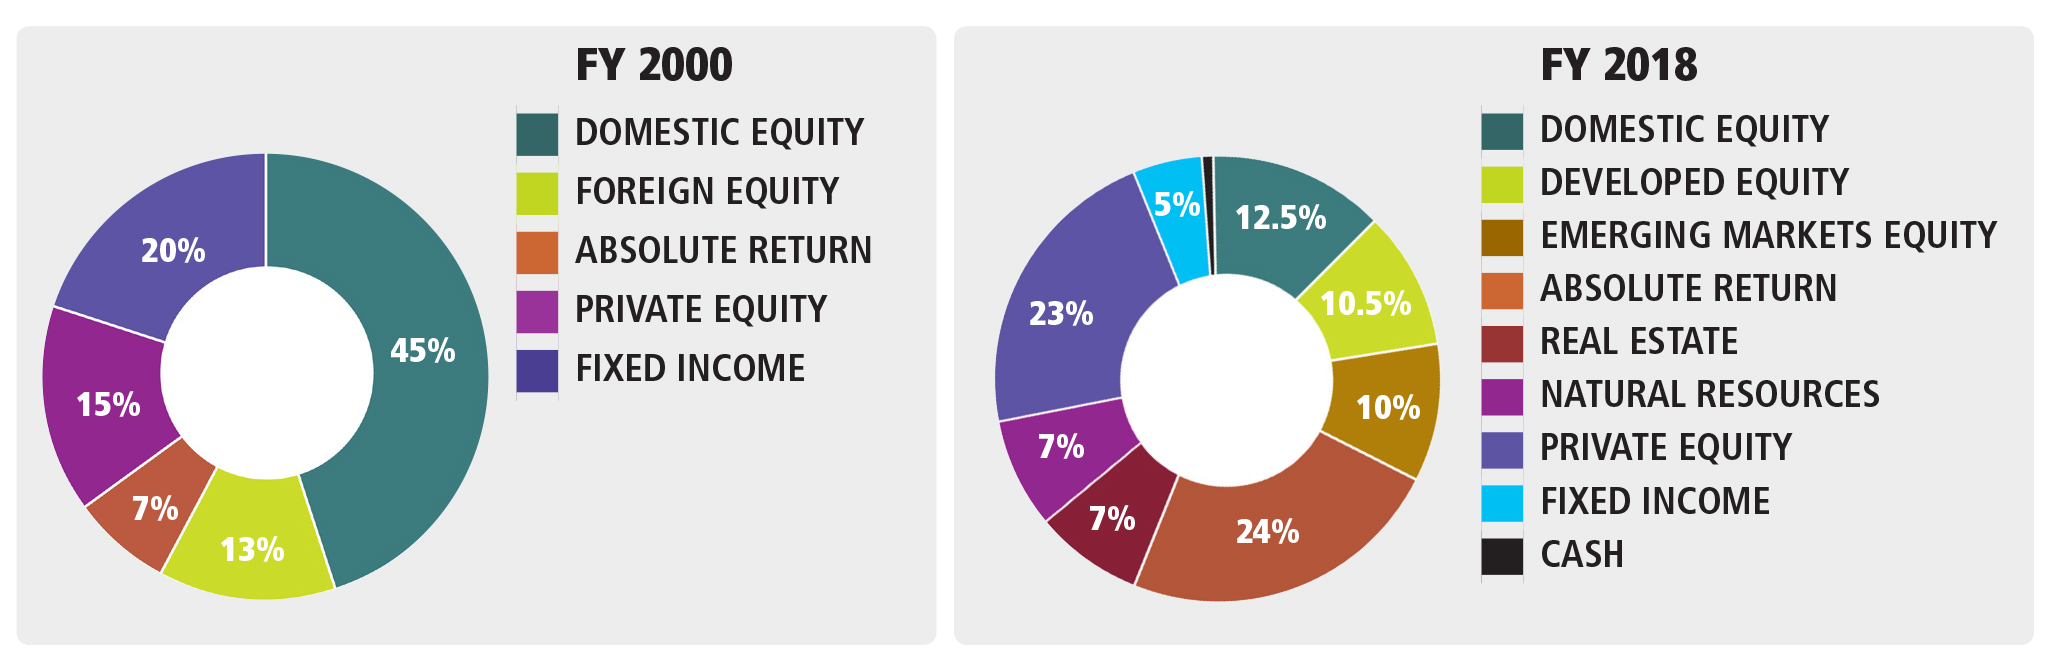 Change in Asset Allocation